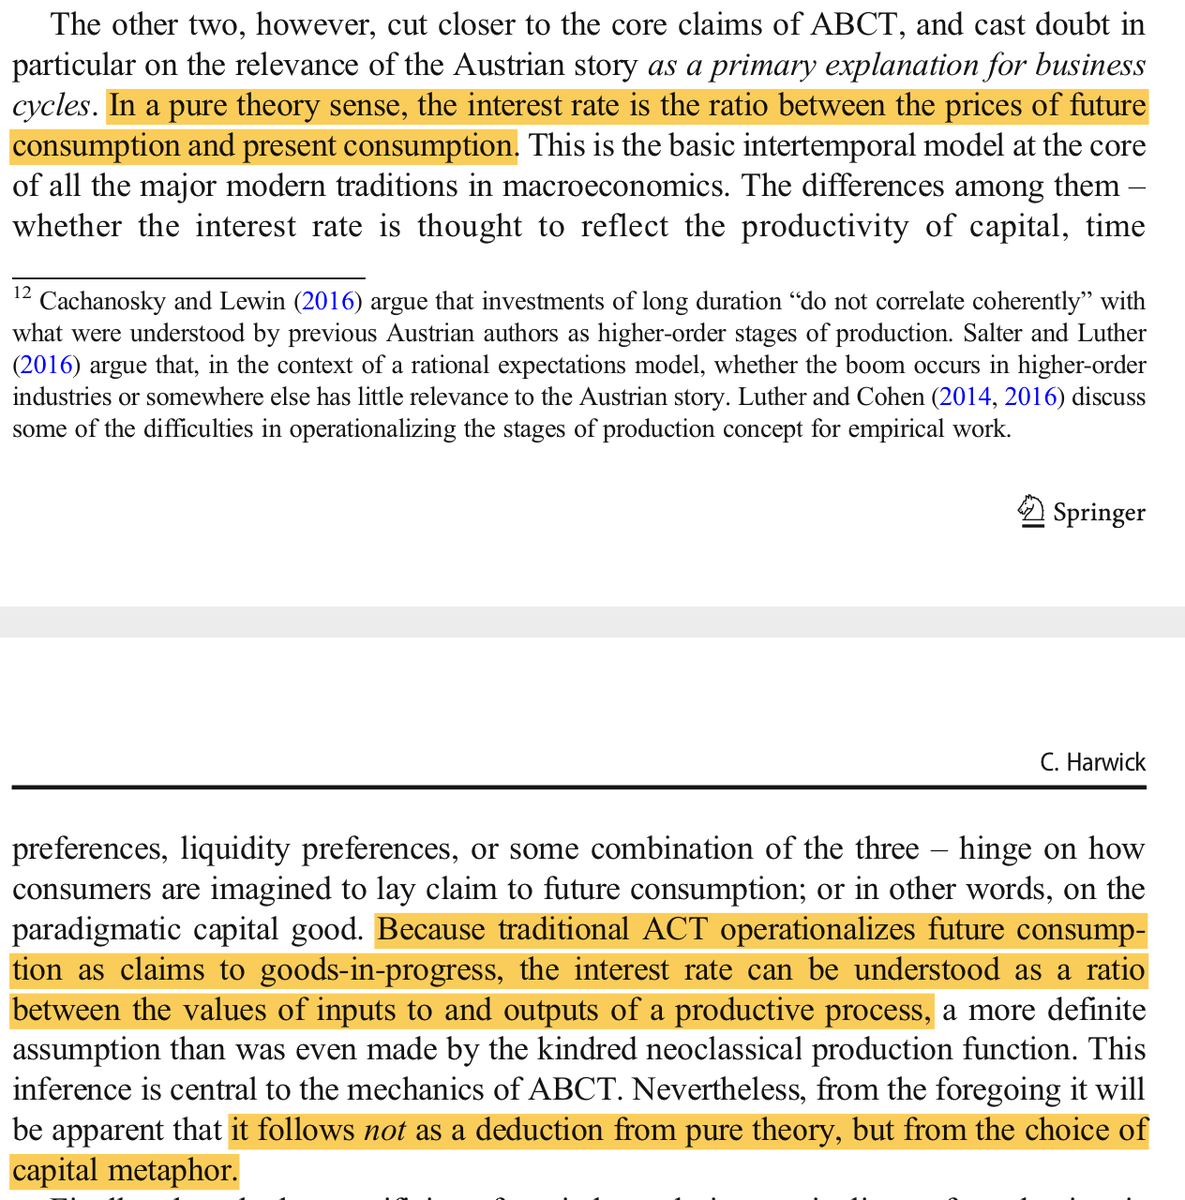 More fundamentally though, ABCT and traditional ACT make a big illegitimate leap:—from "The interest rate is the relative price of future vs present consumption" (yep)—to "The interest rate is the relative price of outputs to inputs" (only in a model with no durable capital)